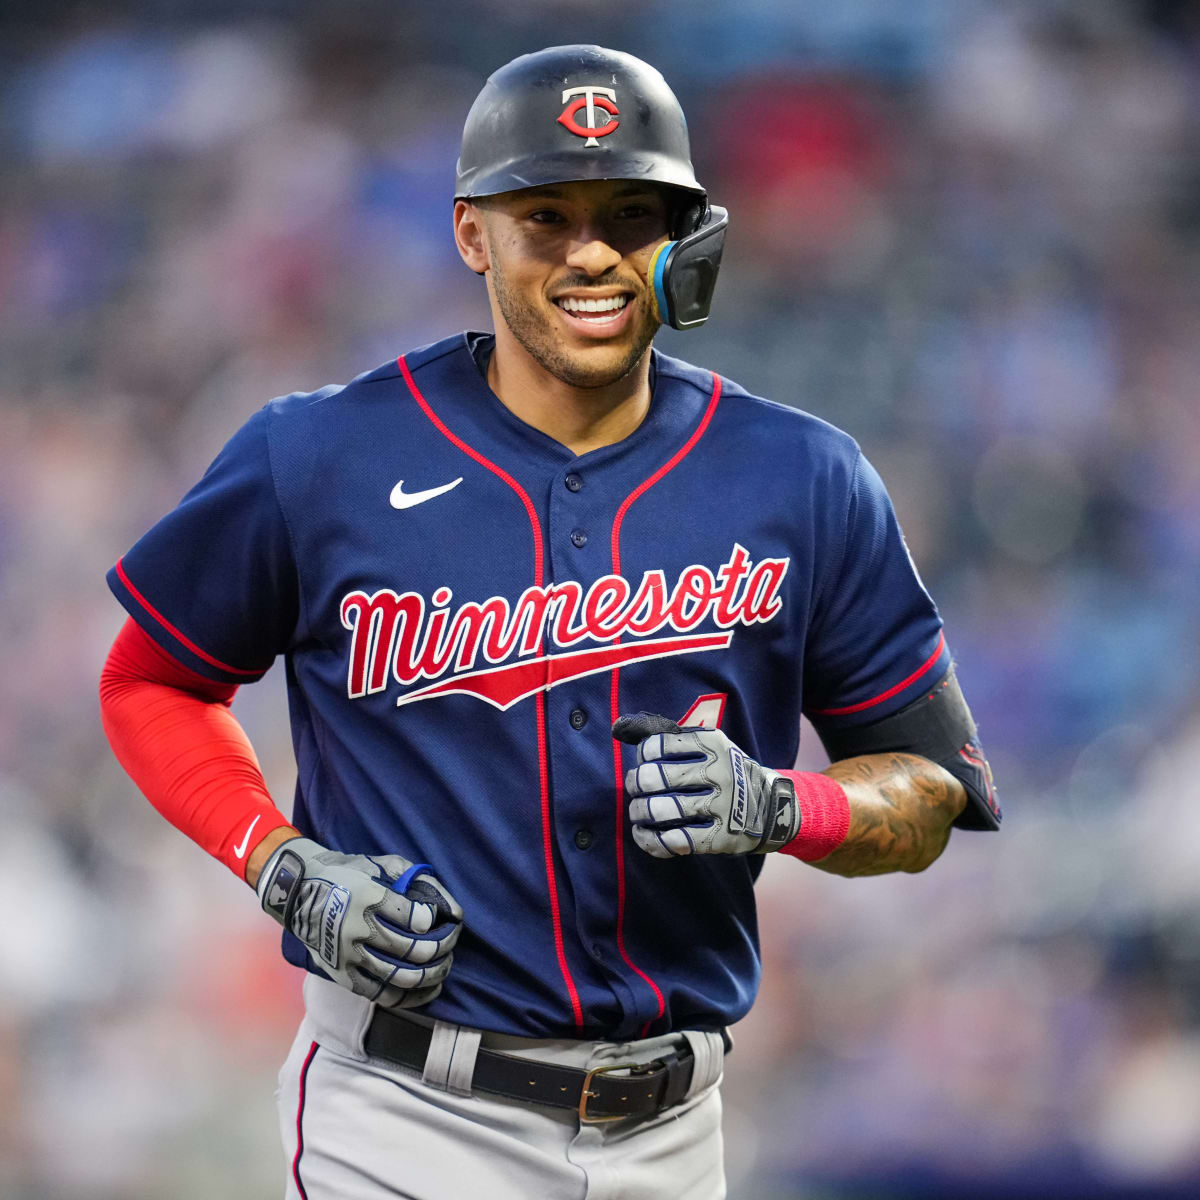 Carlos Correa to the Twins? The factors that went into the Cubs